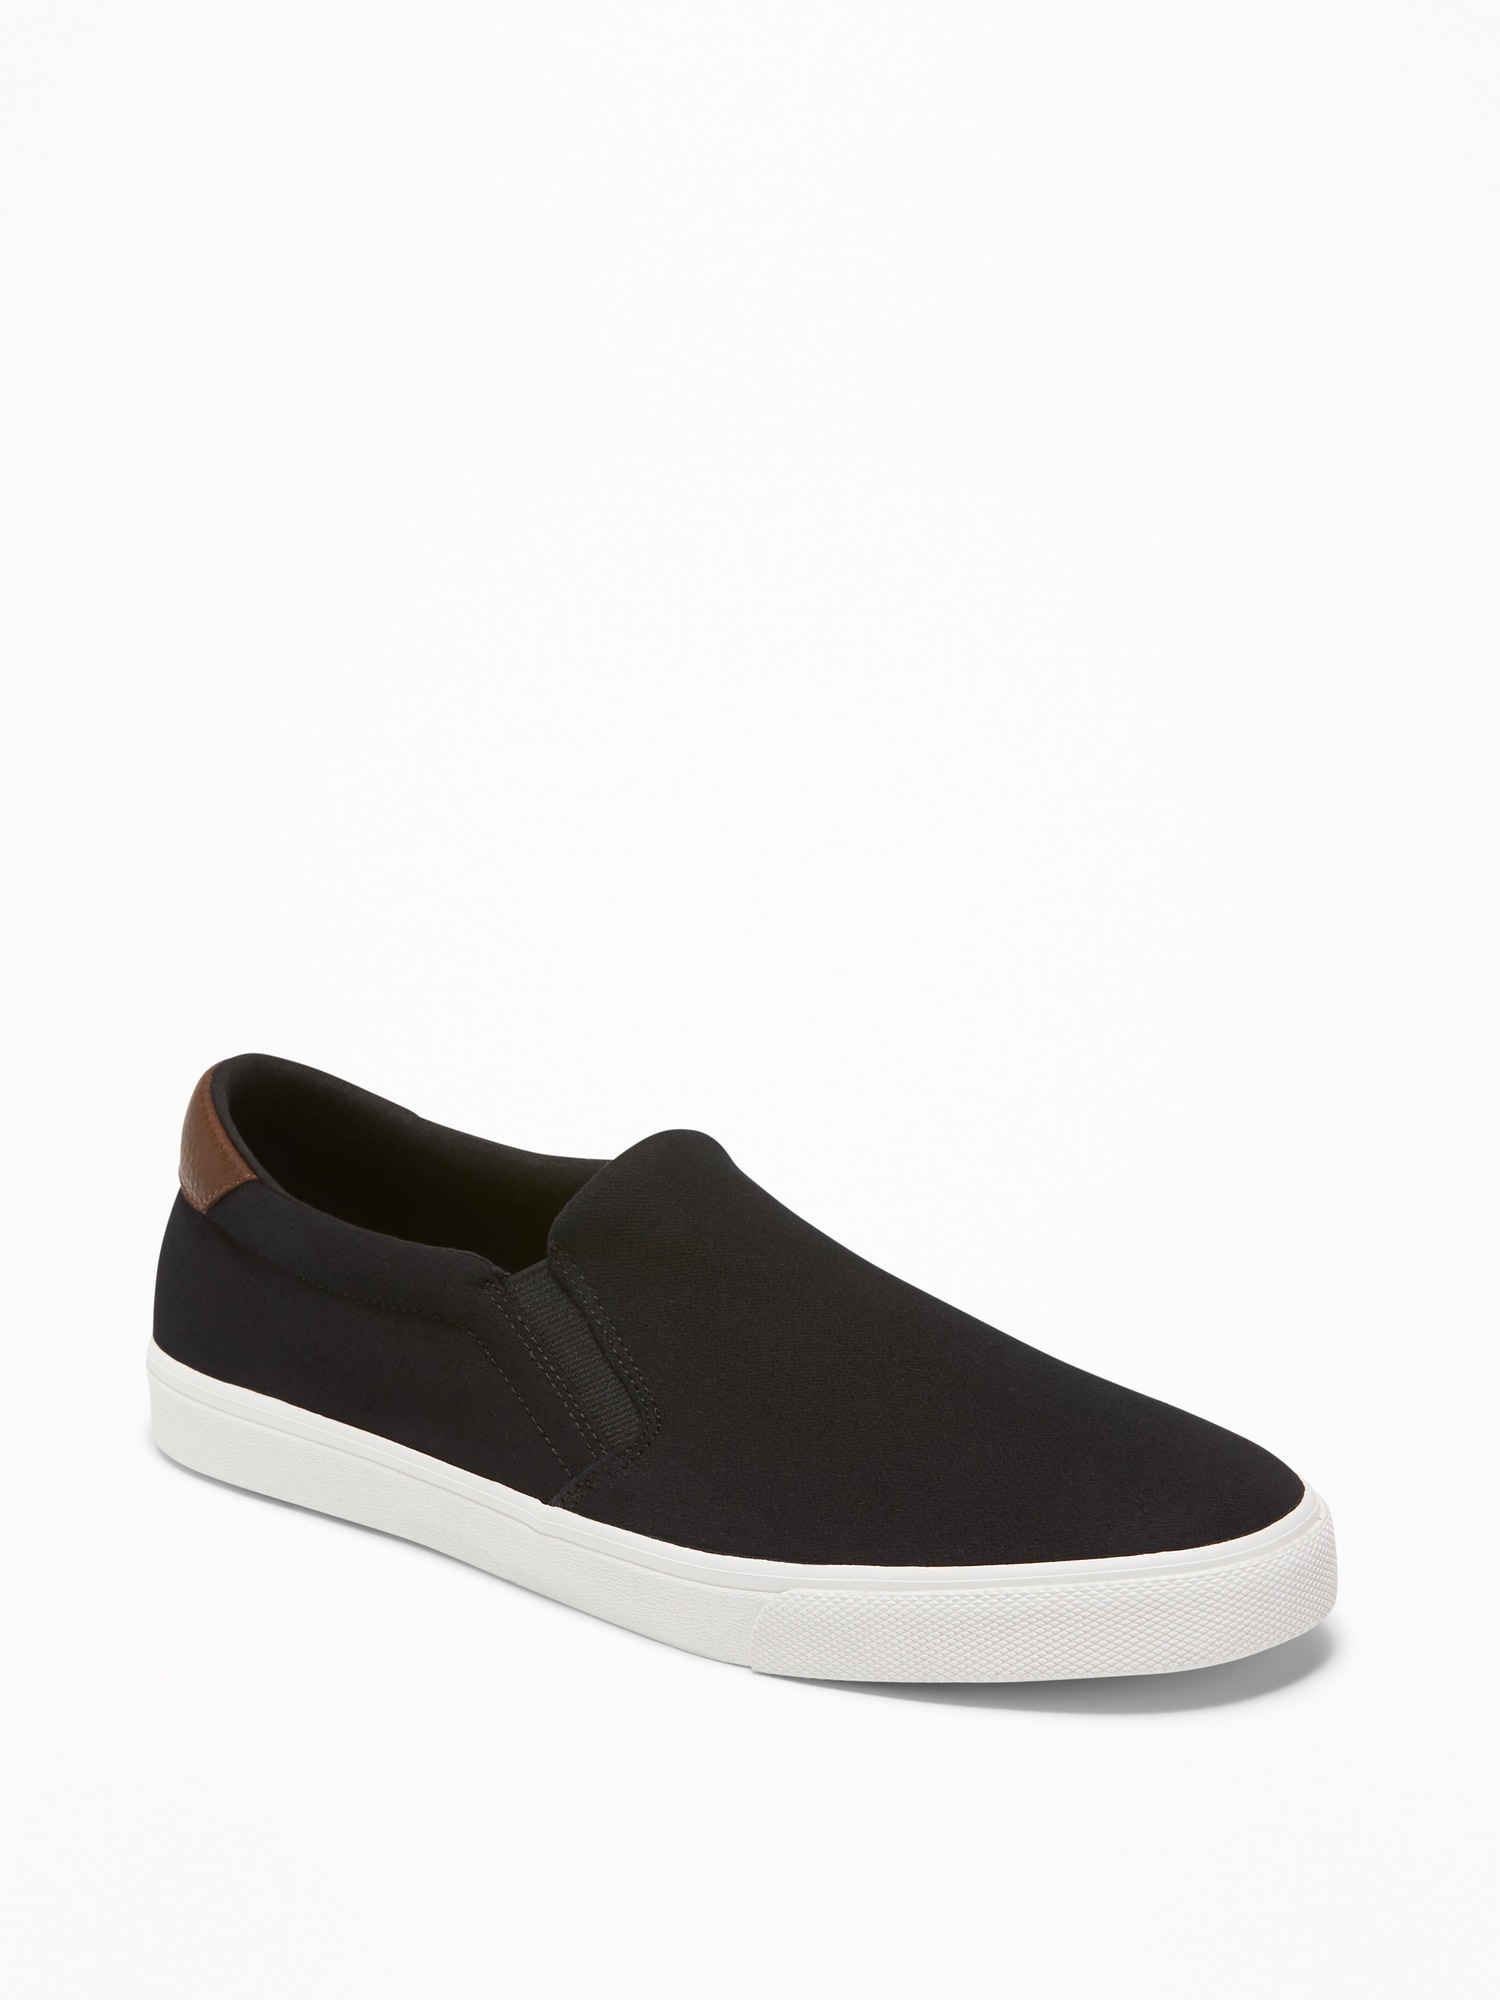 Mixed-Fabric Slip-Ons for Men Old Navy